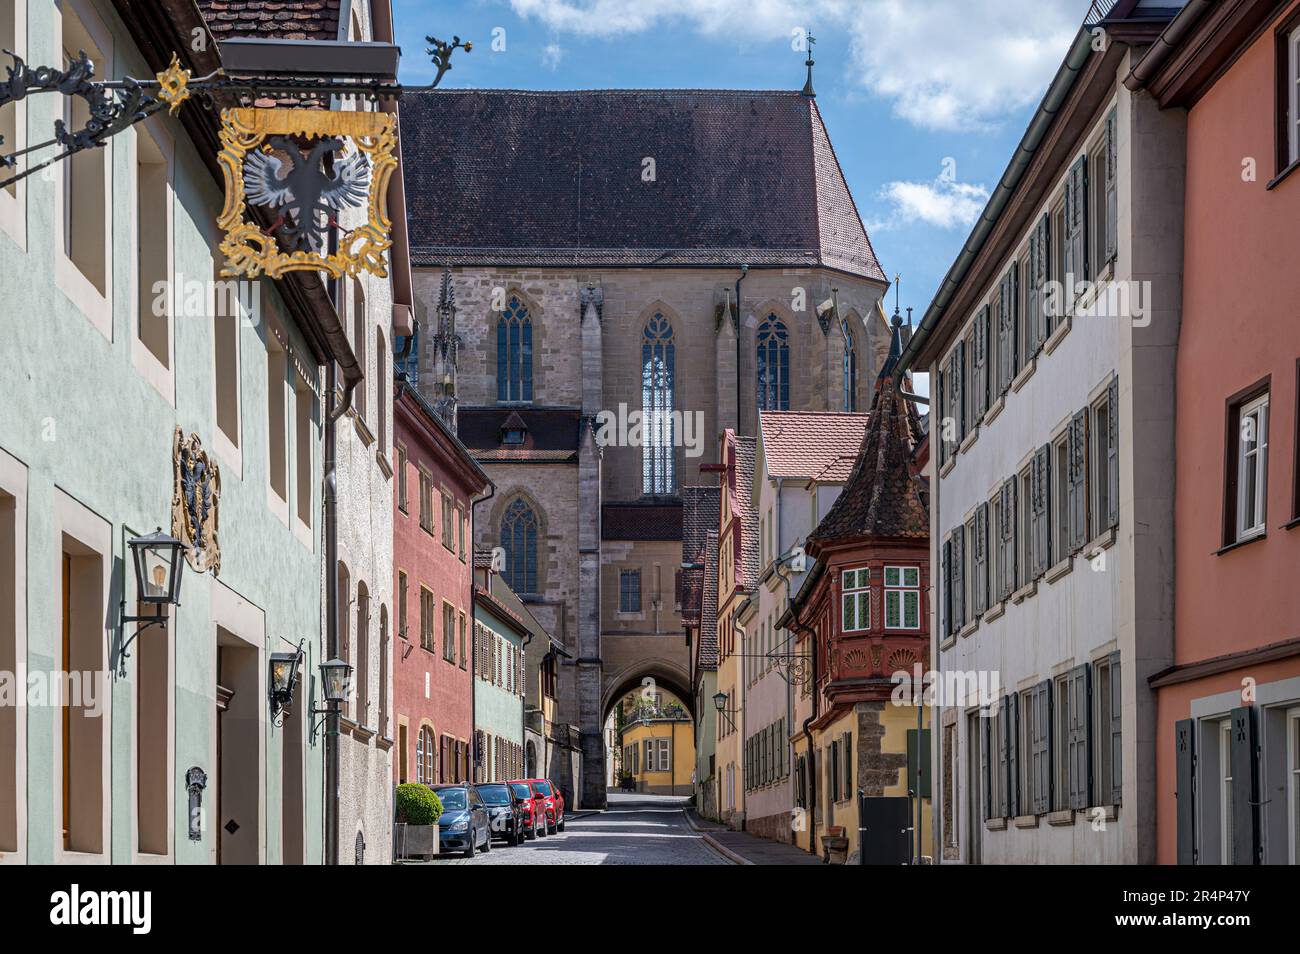 Street with church in Rothenburg ob der Tauber, Germany Stock Photo